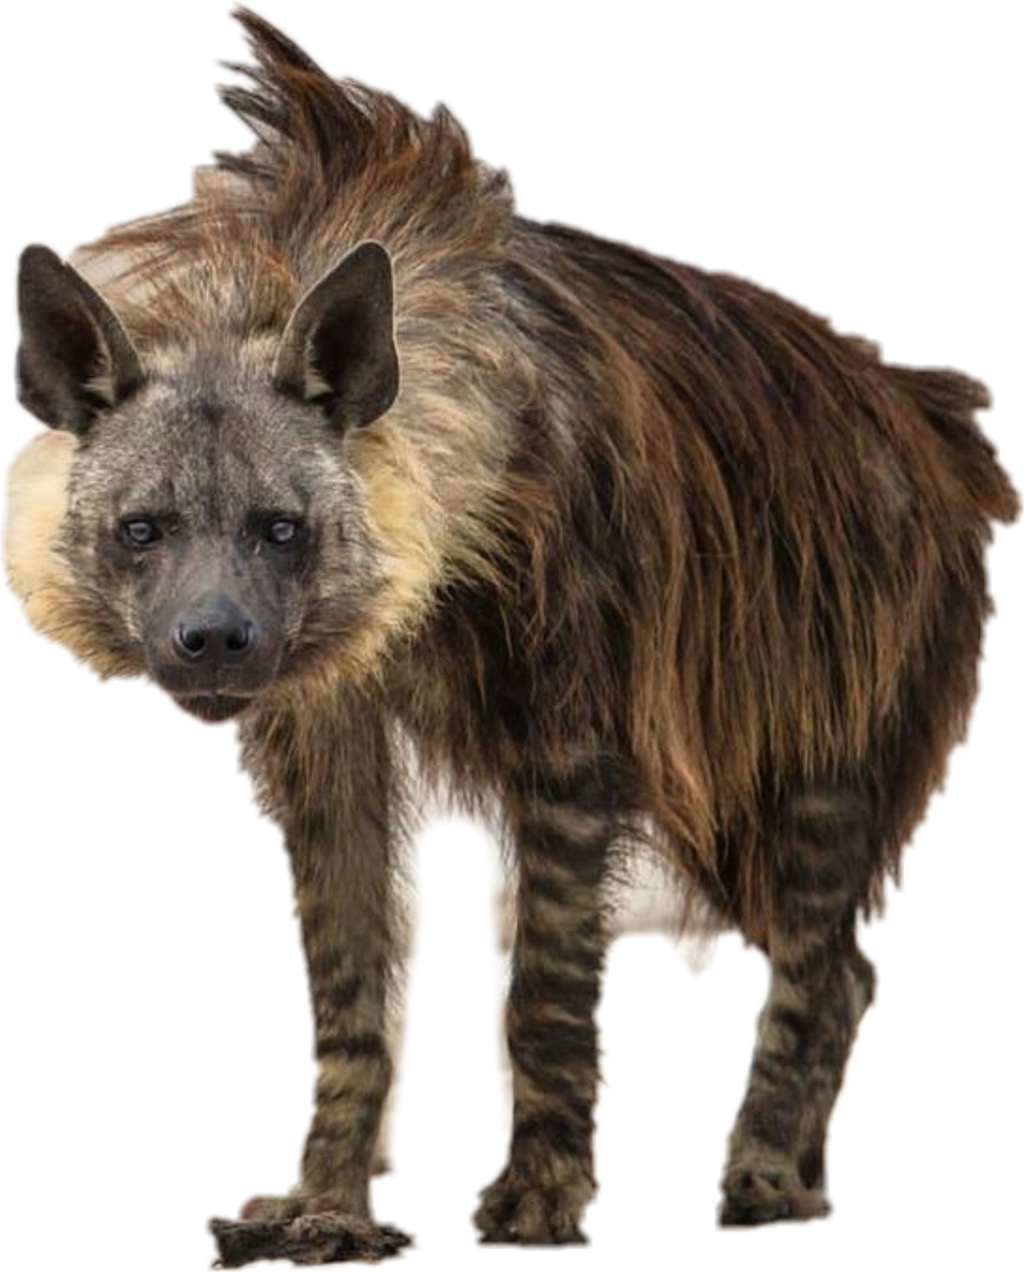 A Hyena Standing On A Black Background